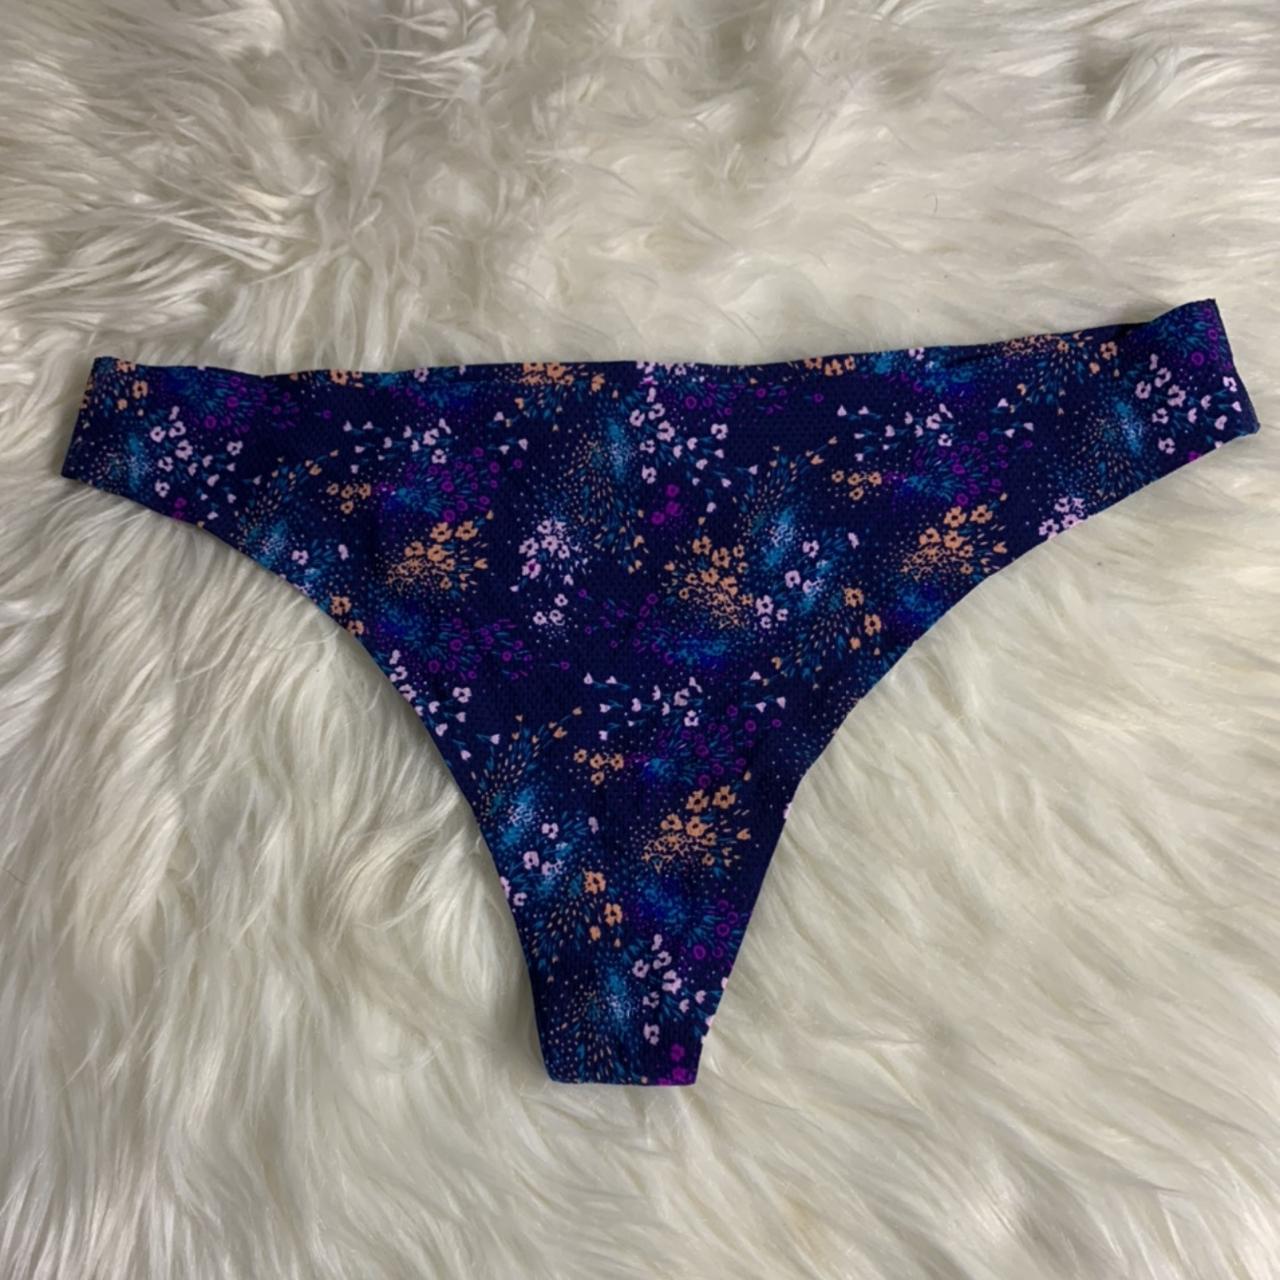 Product Image 1 - Navy blue floral print thong
This